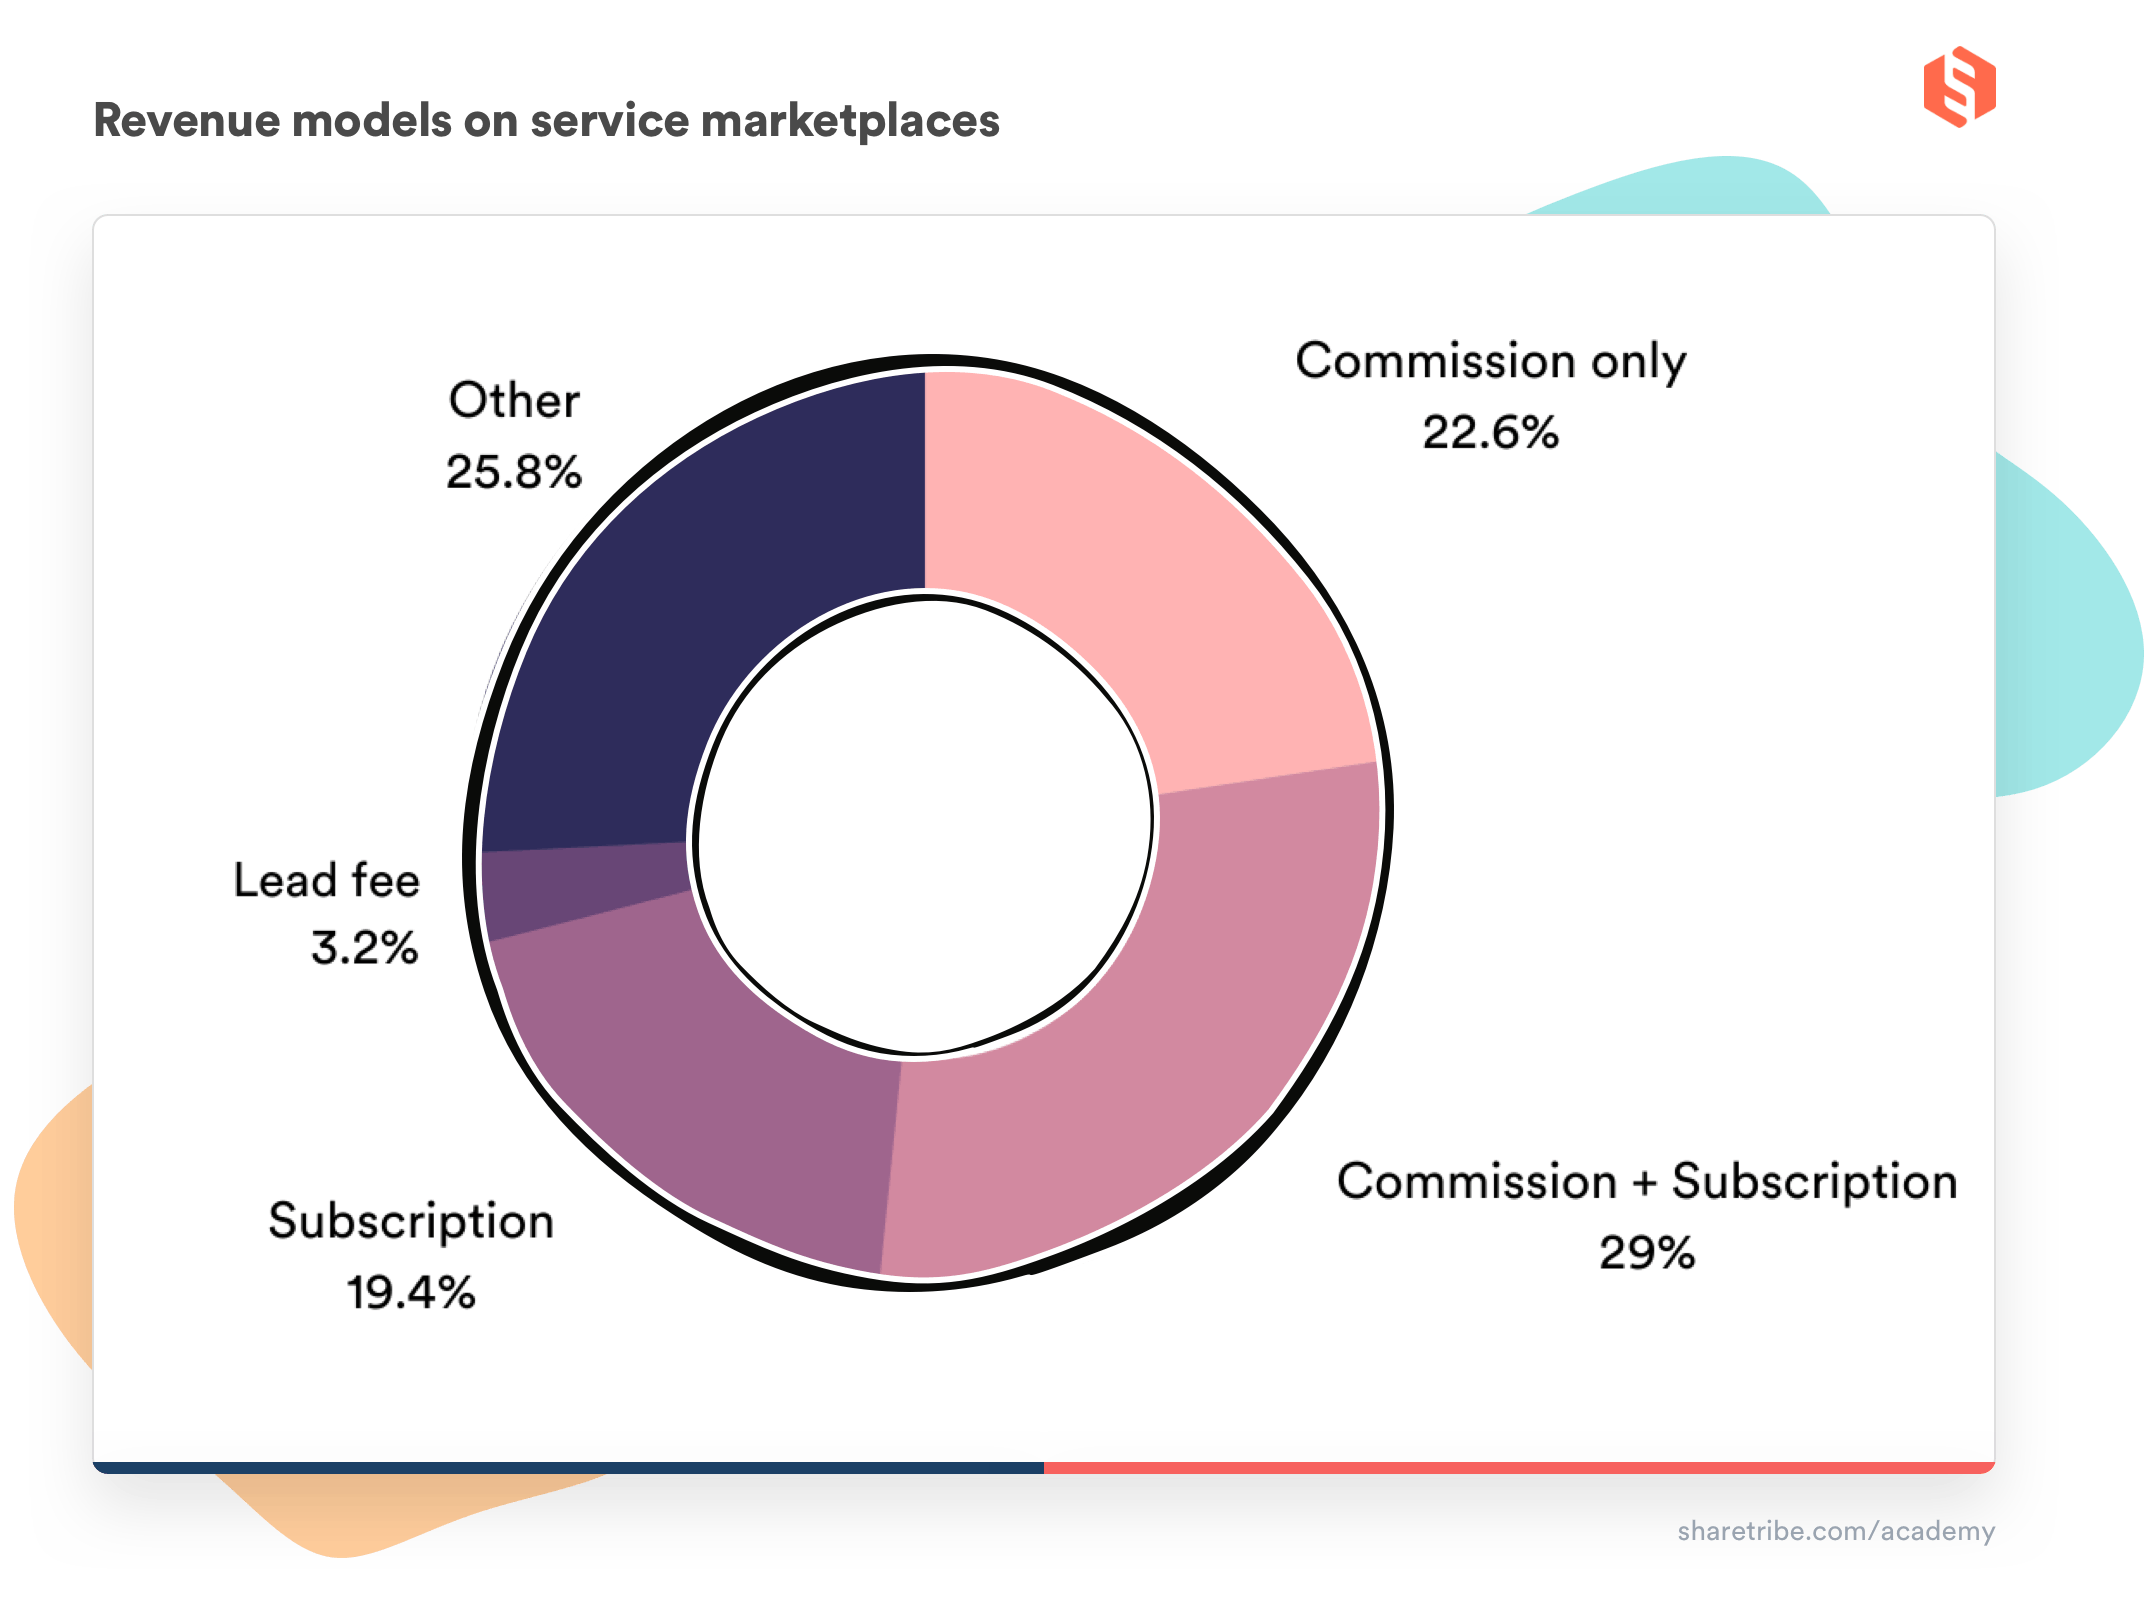 A donut chart of the percentages of revenue models used on service marketplaces